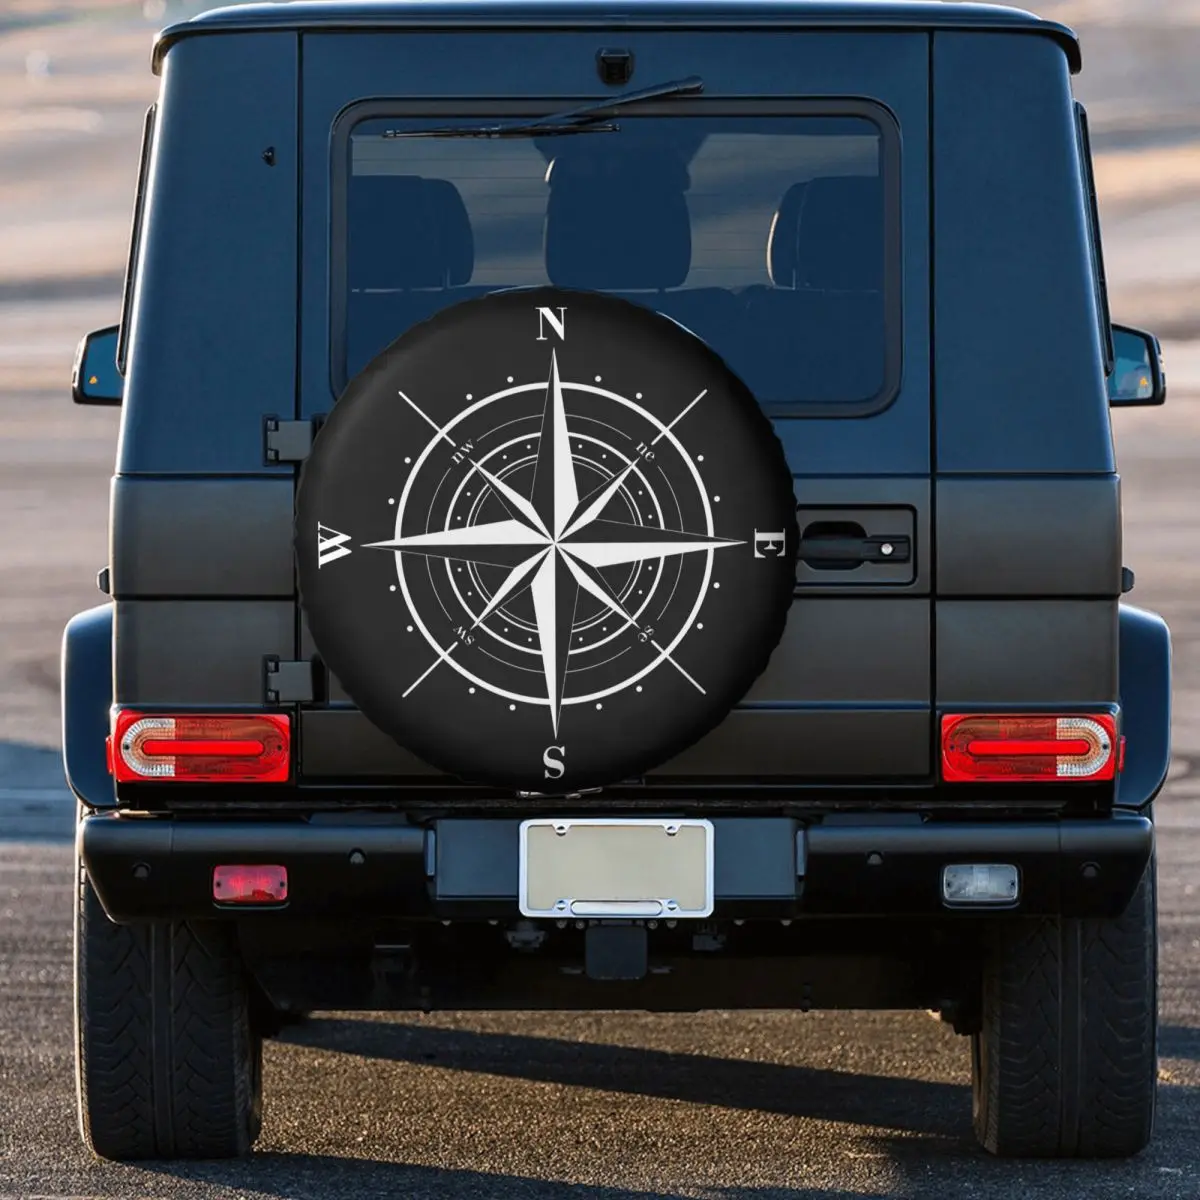 Compass Cardinal Points Of Earth Tire Cover 4WD Trailer Nautical Spare Wheel  Protector Universal Fit For Jeep Toyota Mitsubishi AliExpress